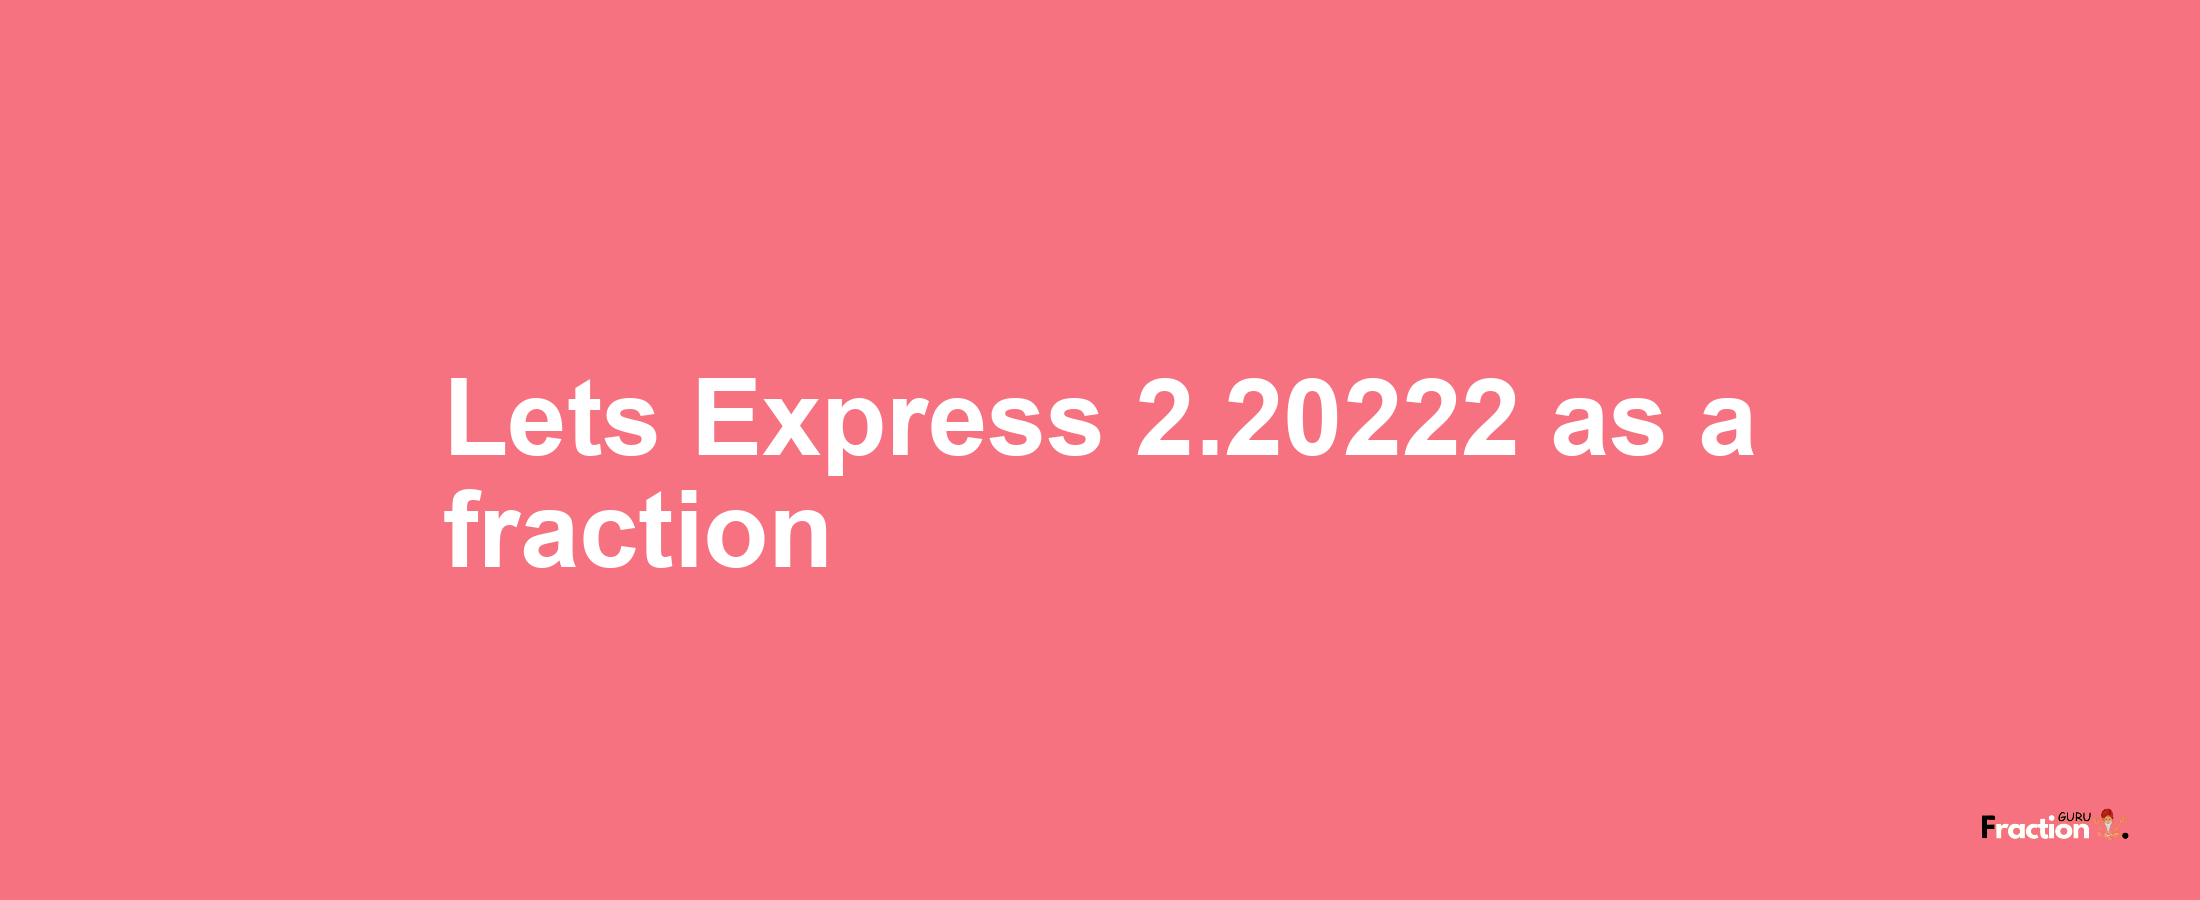 Lets Express 2.20222 as afraction